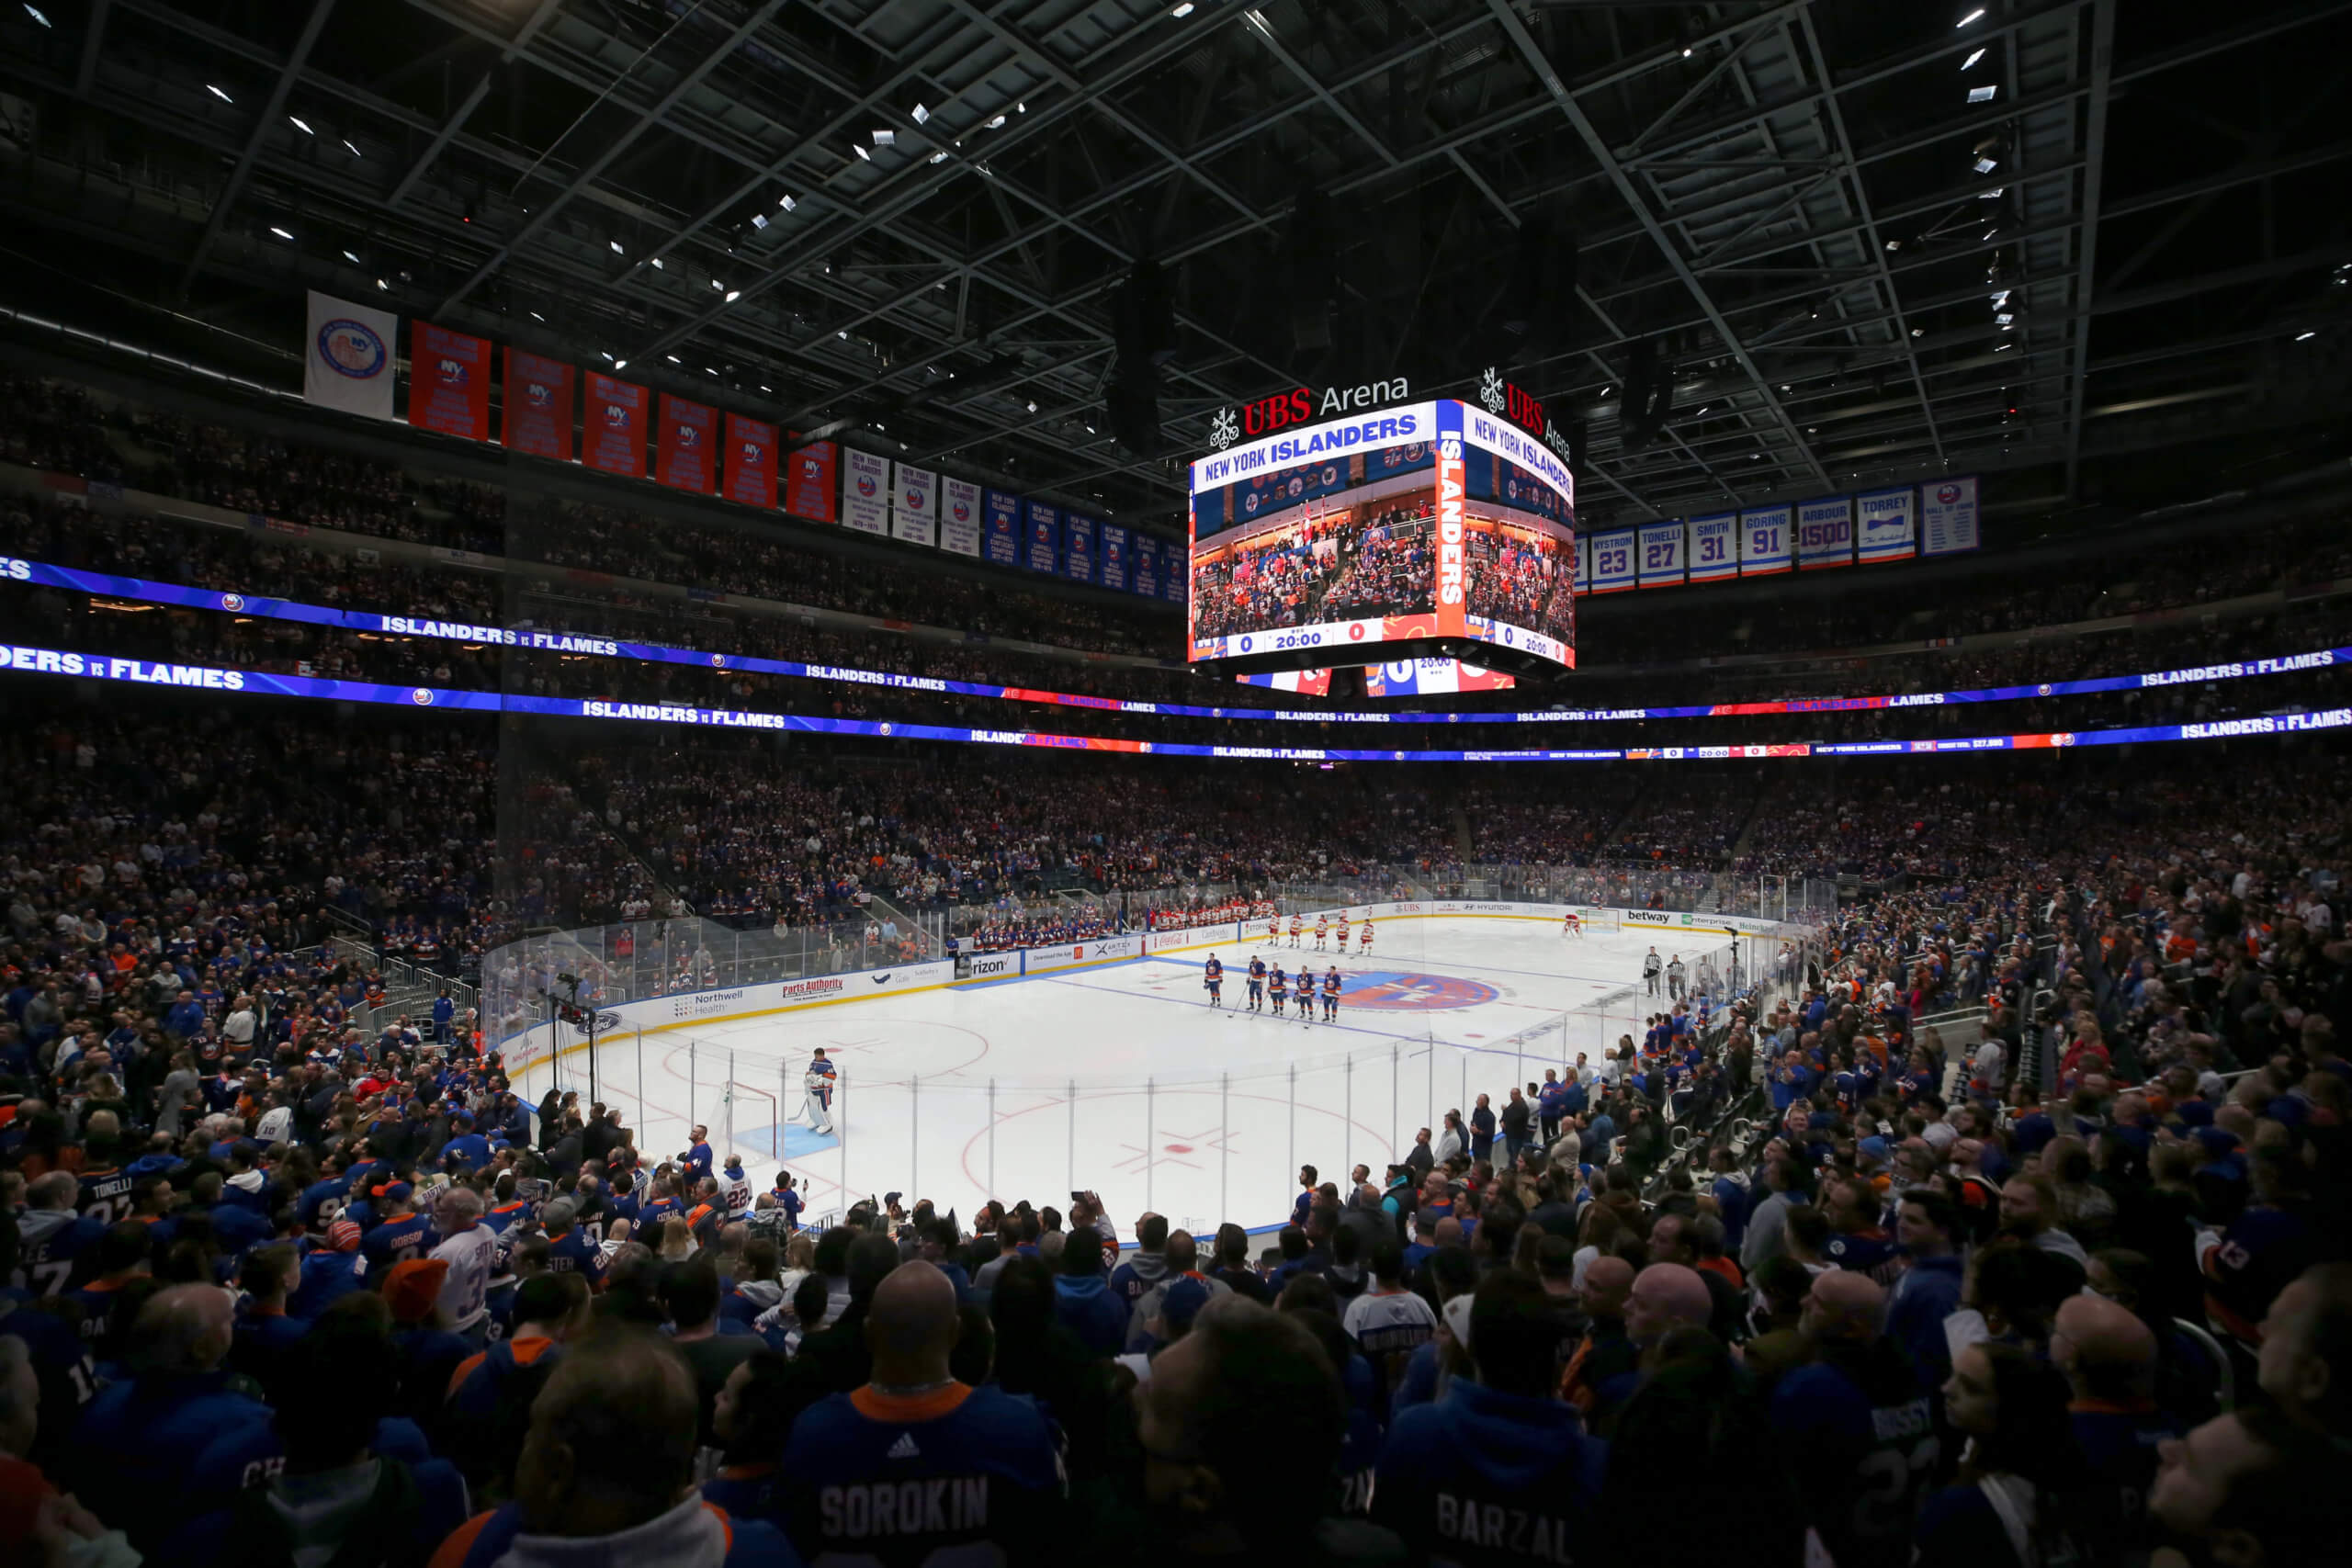 Islanders Get Their First Win At UBS Arena 4-2 Over Devils